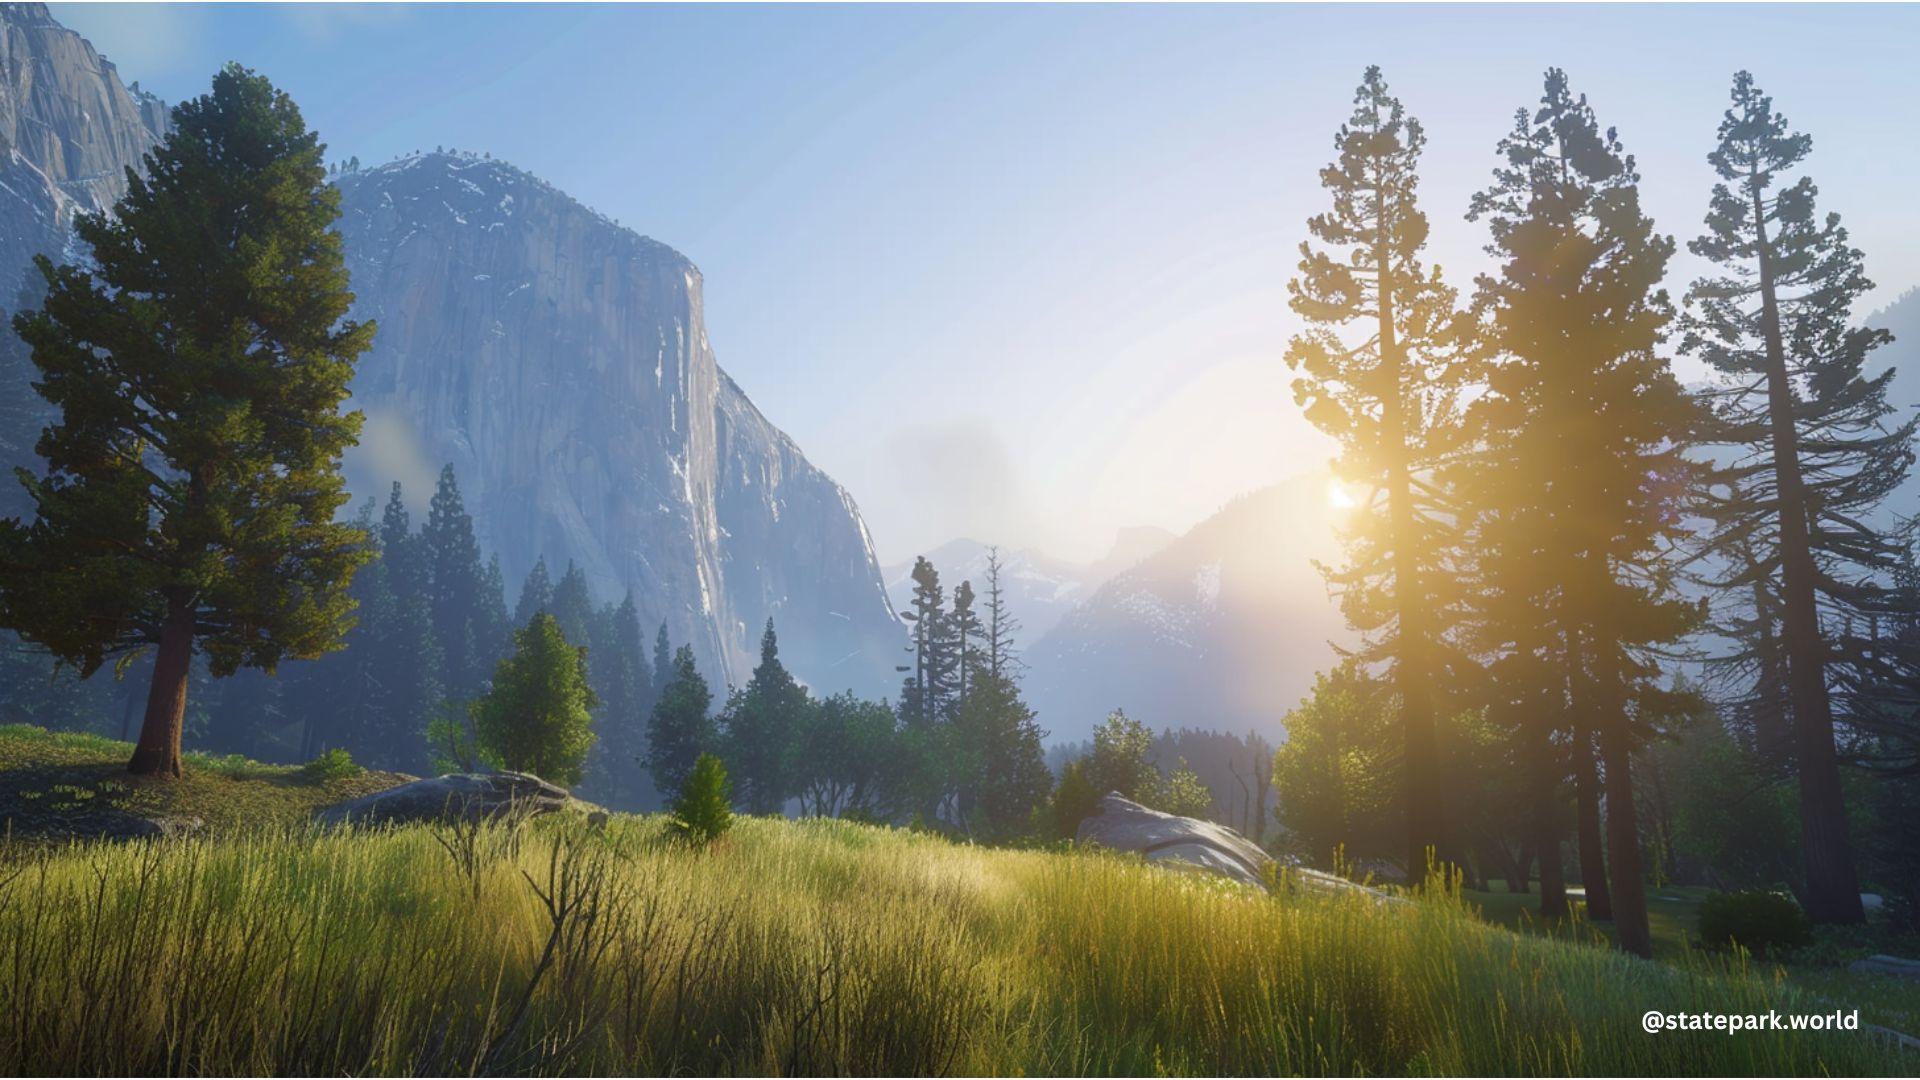 Yosemite National Park RV Campgrounds